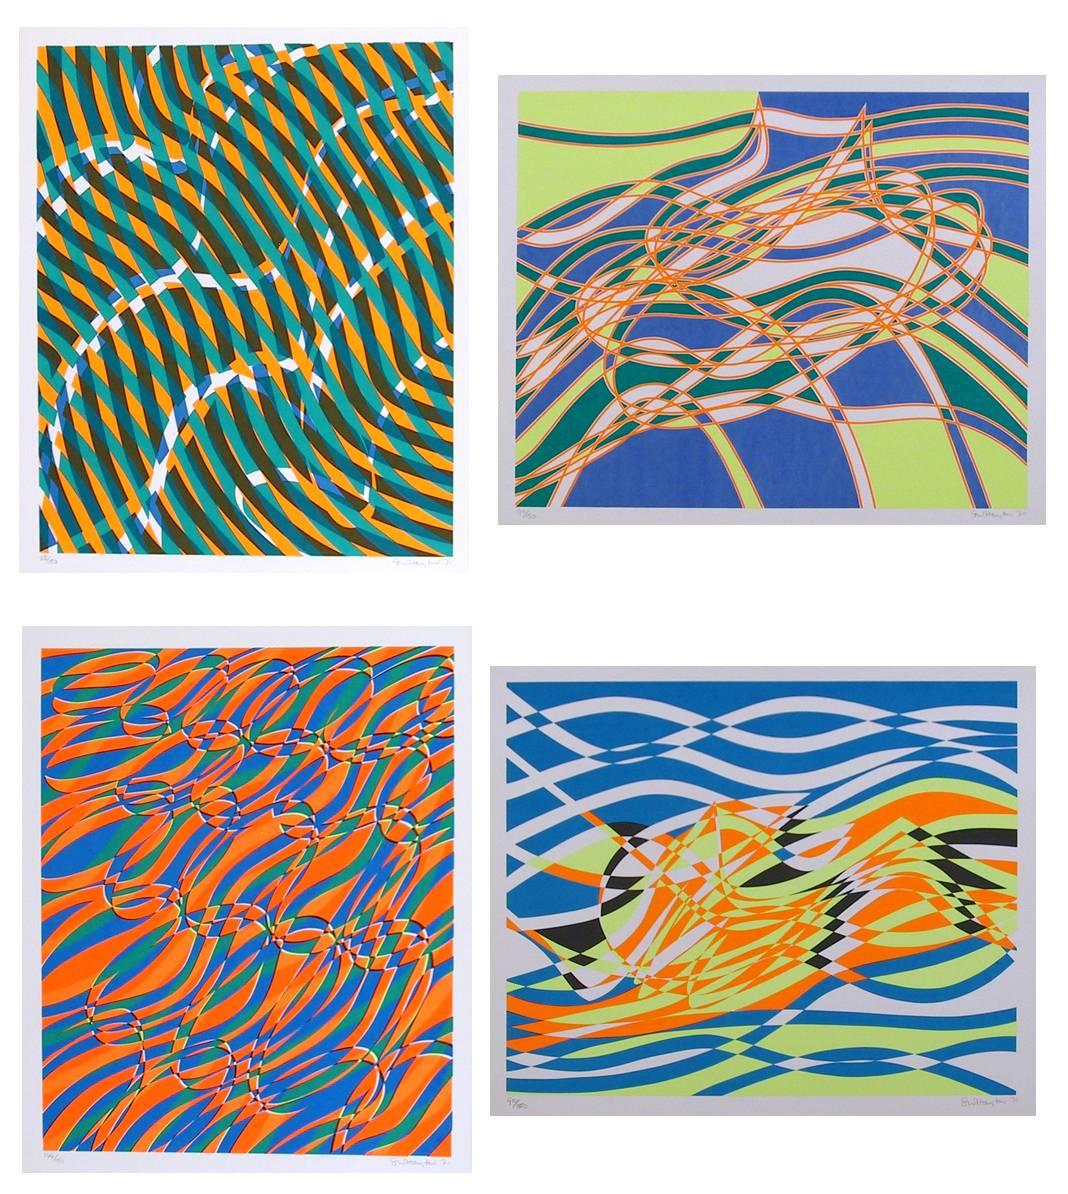 The Aquarius Suite of Four Silkscreens by Stanley Hayter